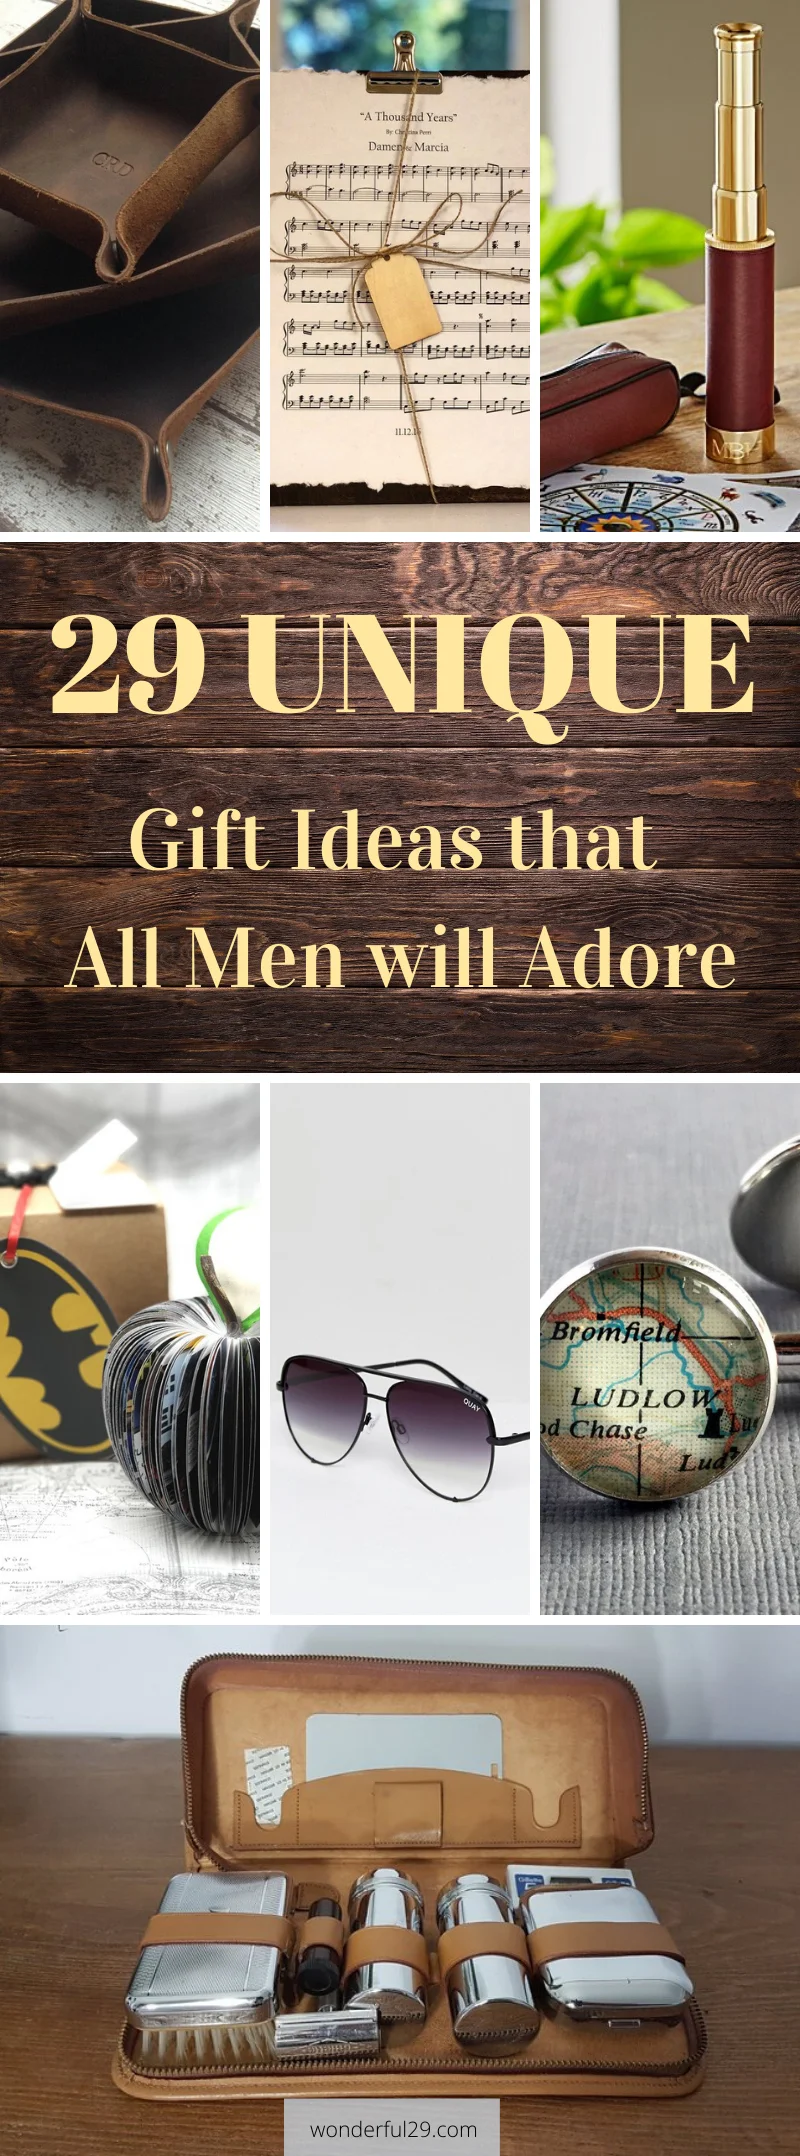 Unique Valentine Gifts Men Will LOVE This Year! 2018 - Written Reality